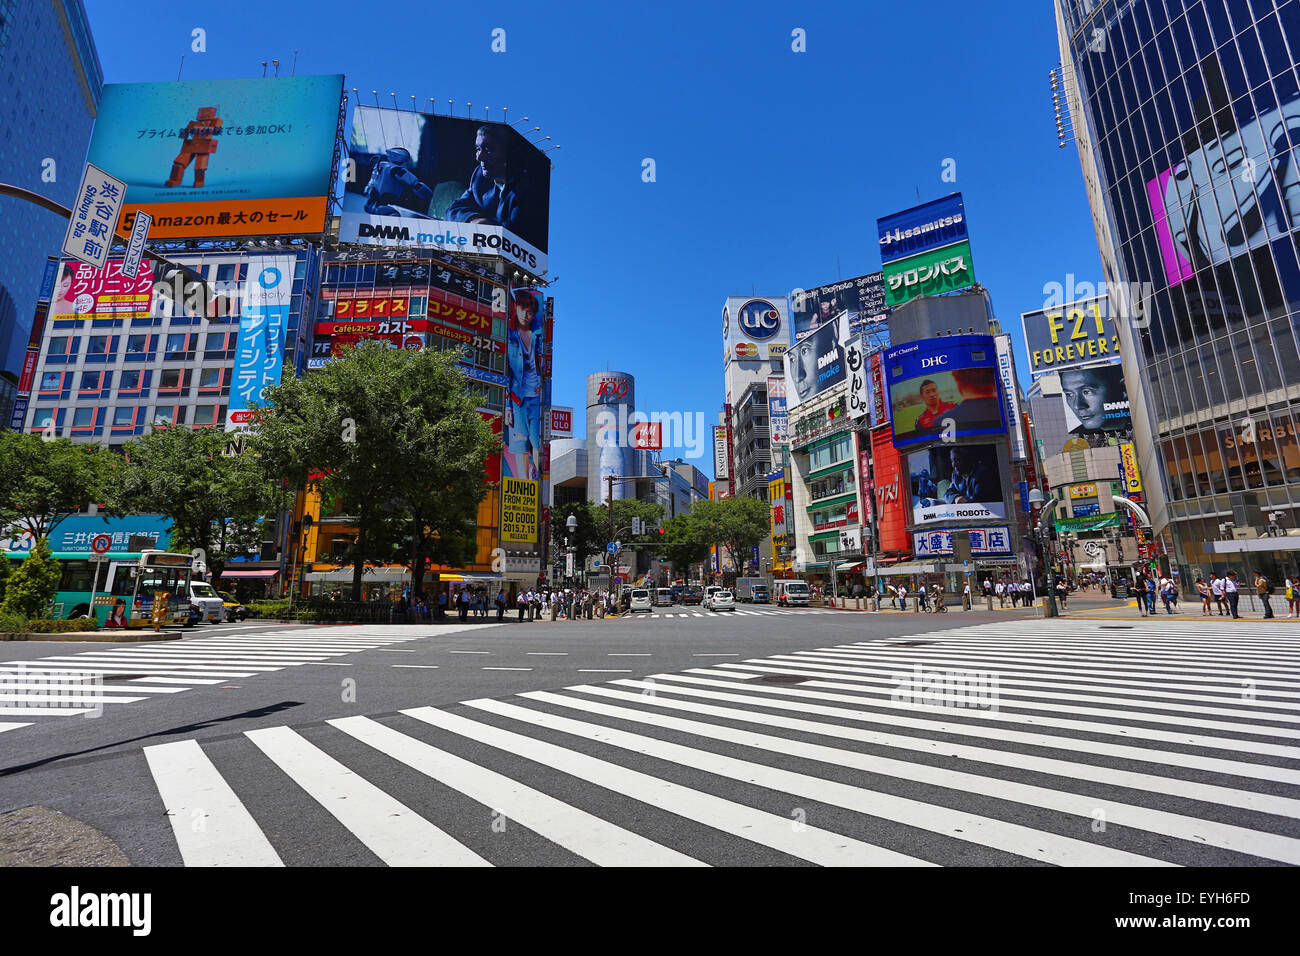 The pedestrian crossing at the intersection in Shibuya, Tokyo, Japan Stock Photo